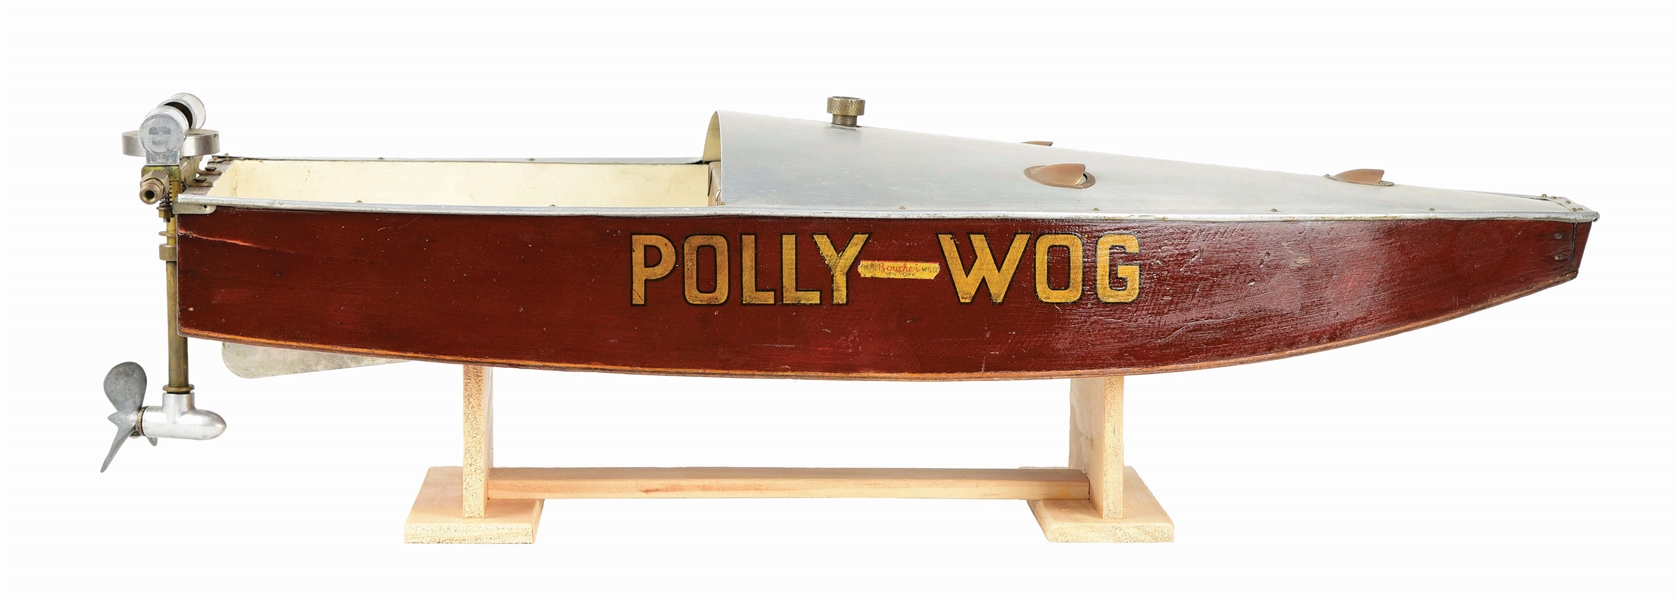 EARLY H. E. BOUCHER POLLY-WOG MODEL BOAT WITH ORIGINAL PLANS IN TUBE.